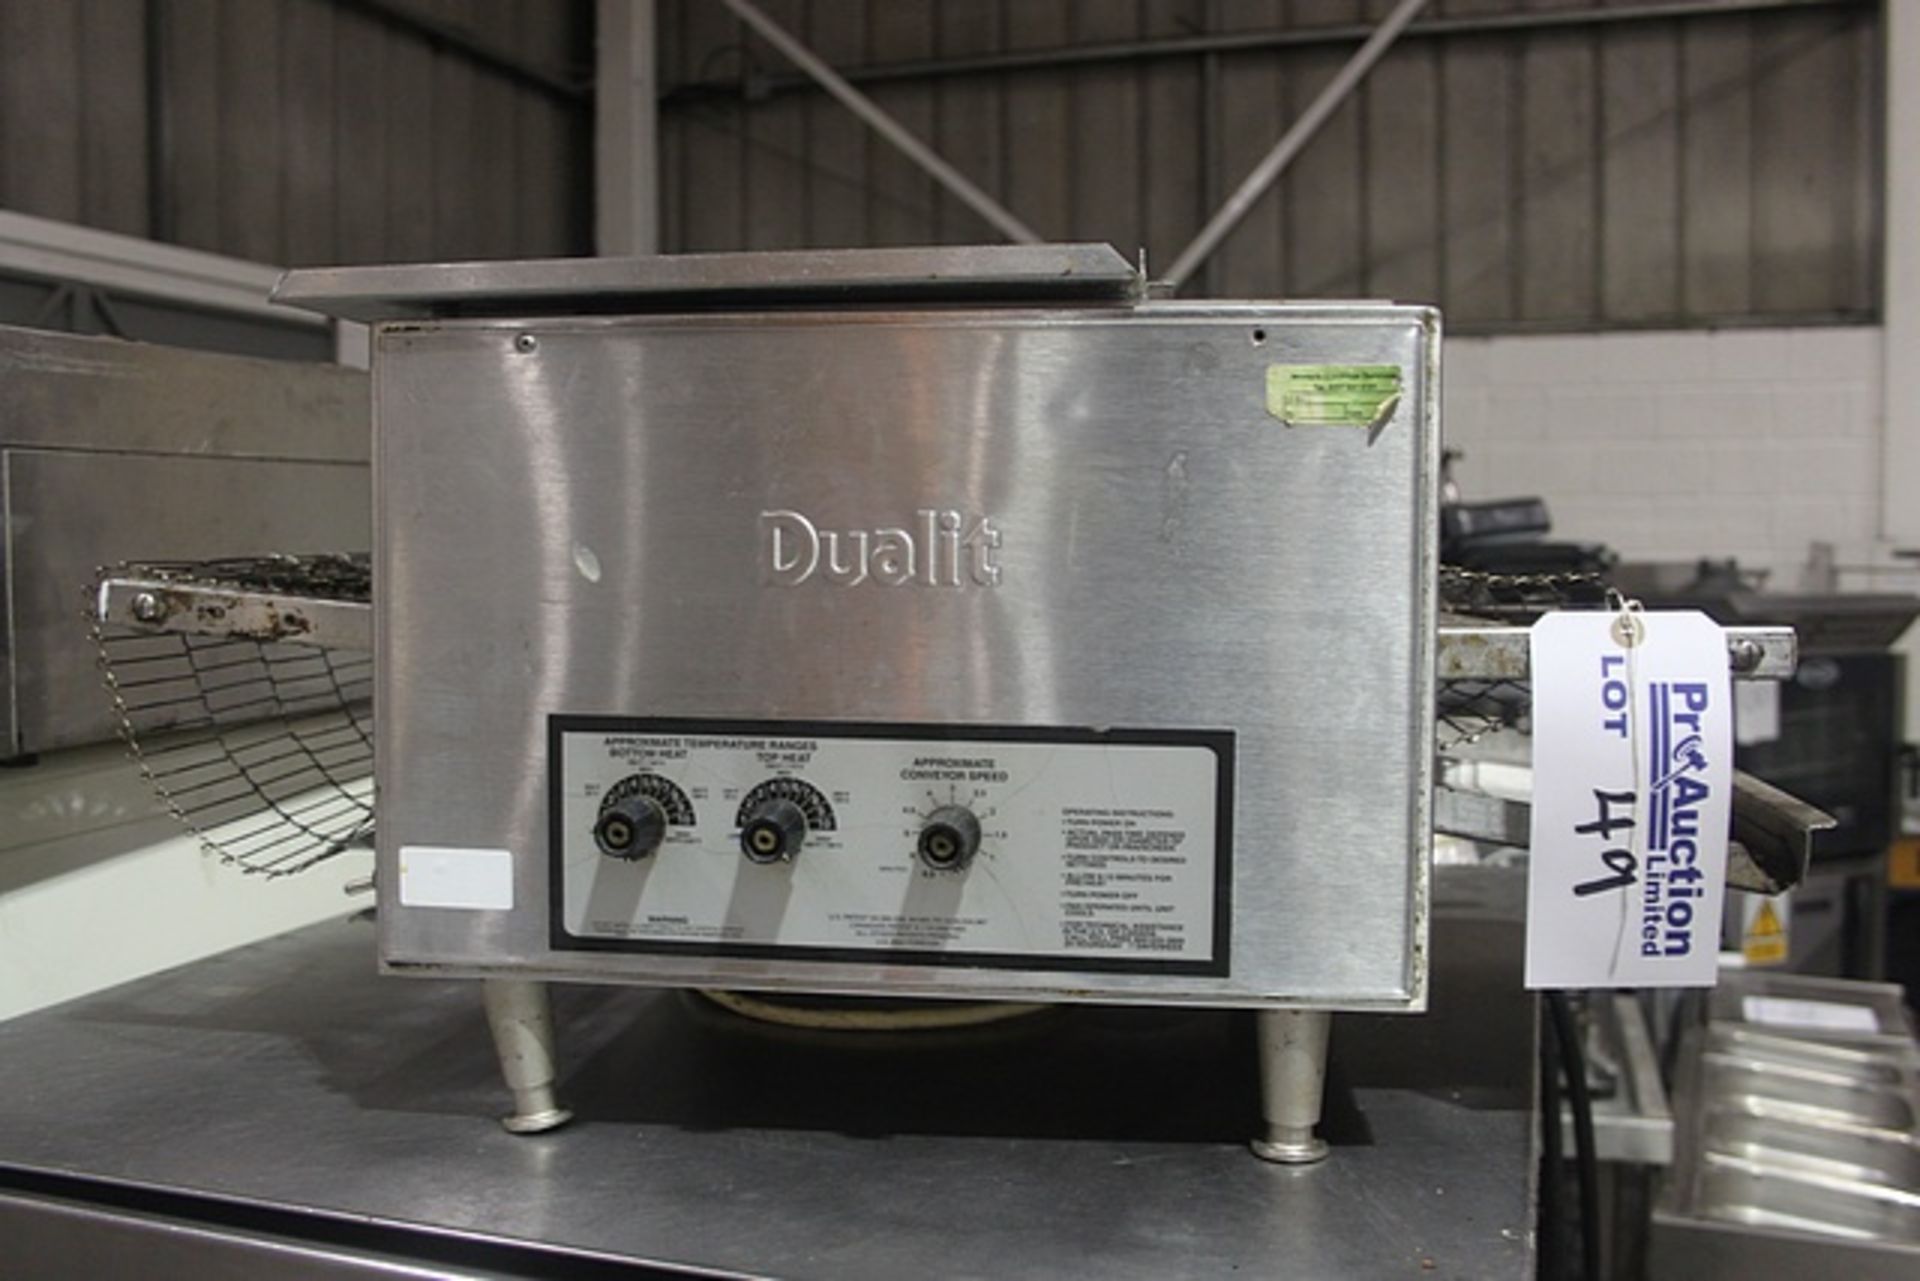 Dualit BM3-214HX stainless steel continuous conveyor toaster output per hour 360 slices loading 2